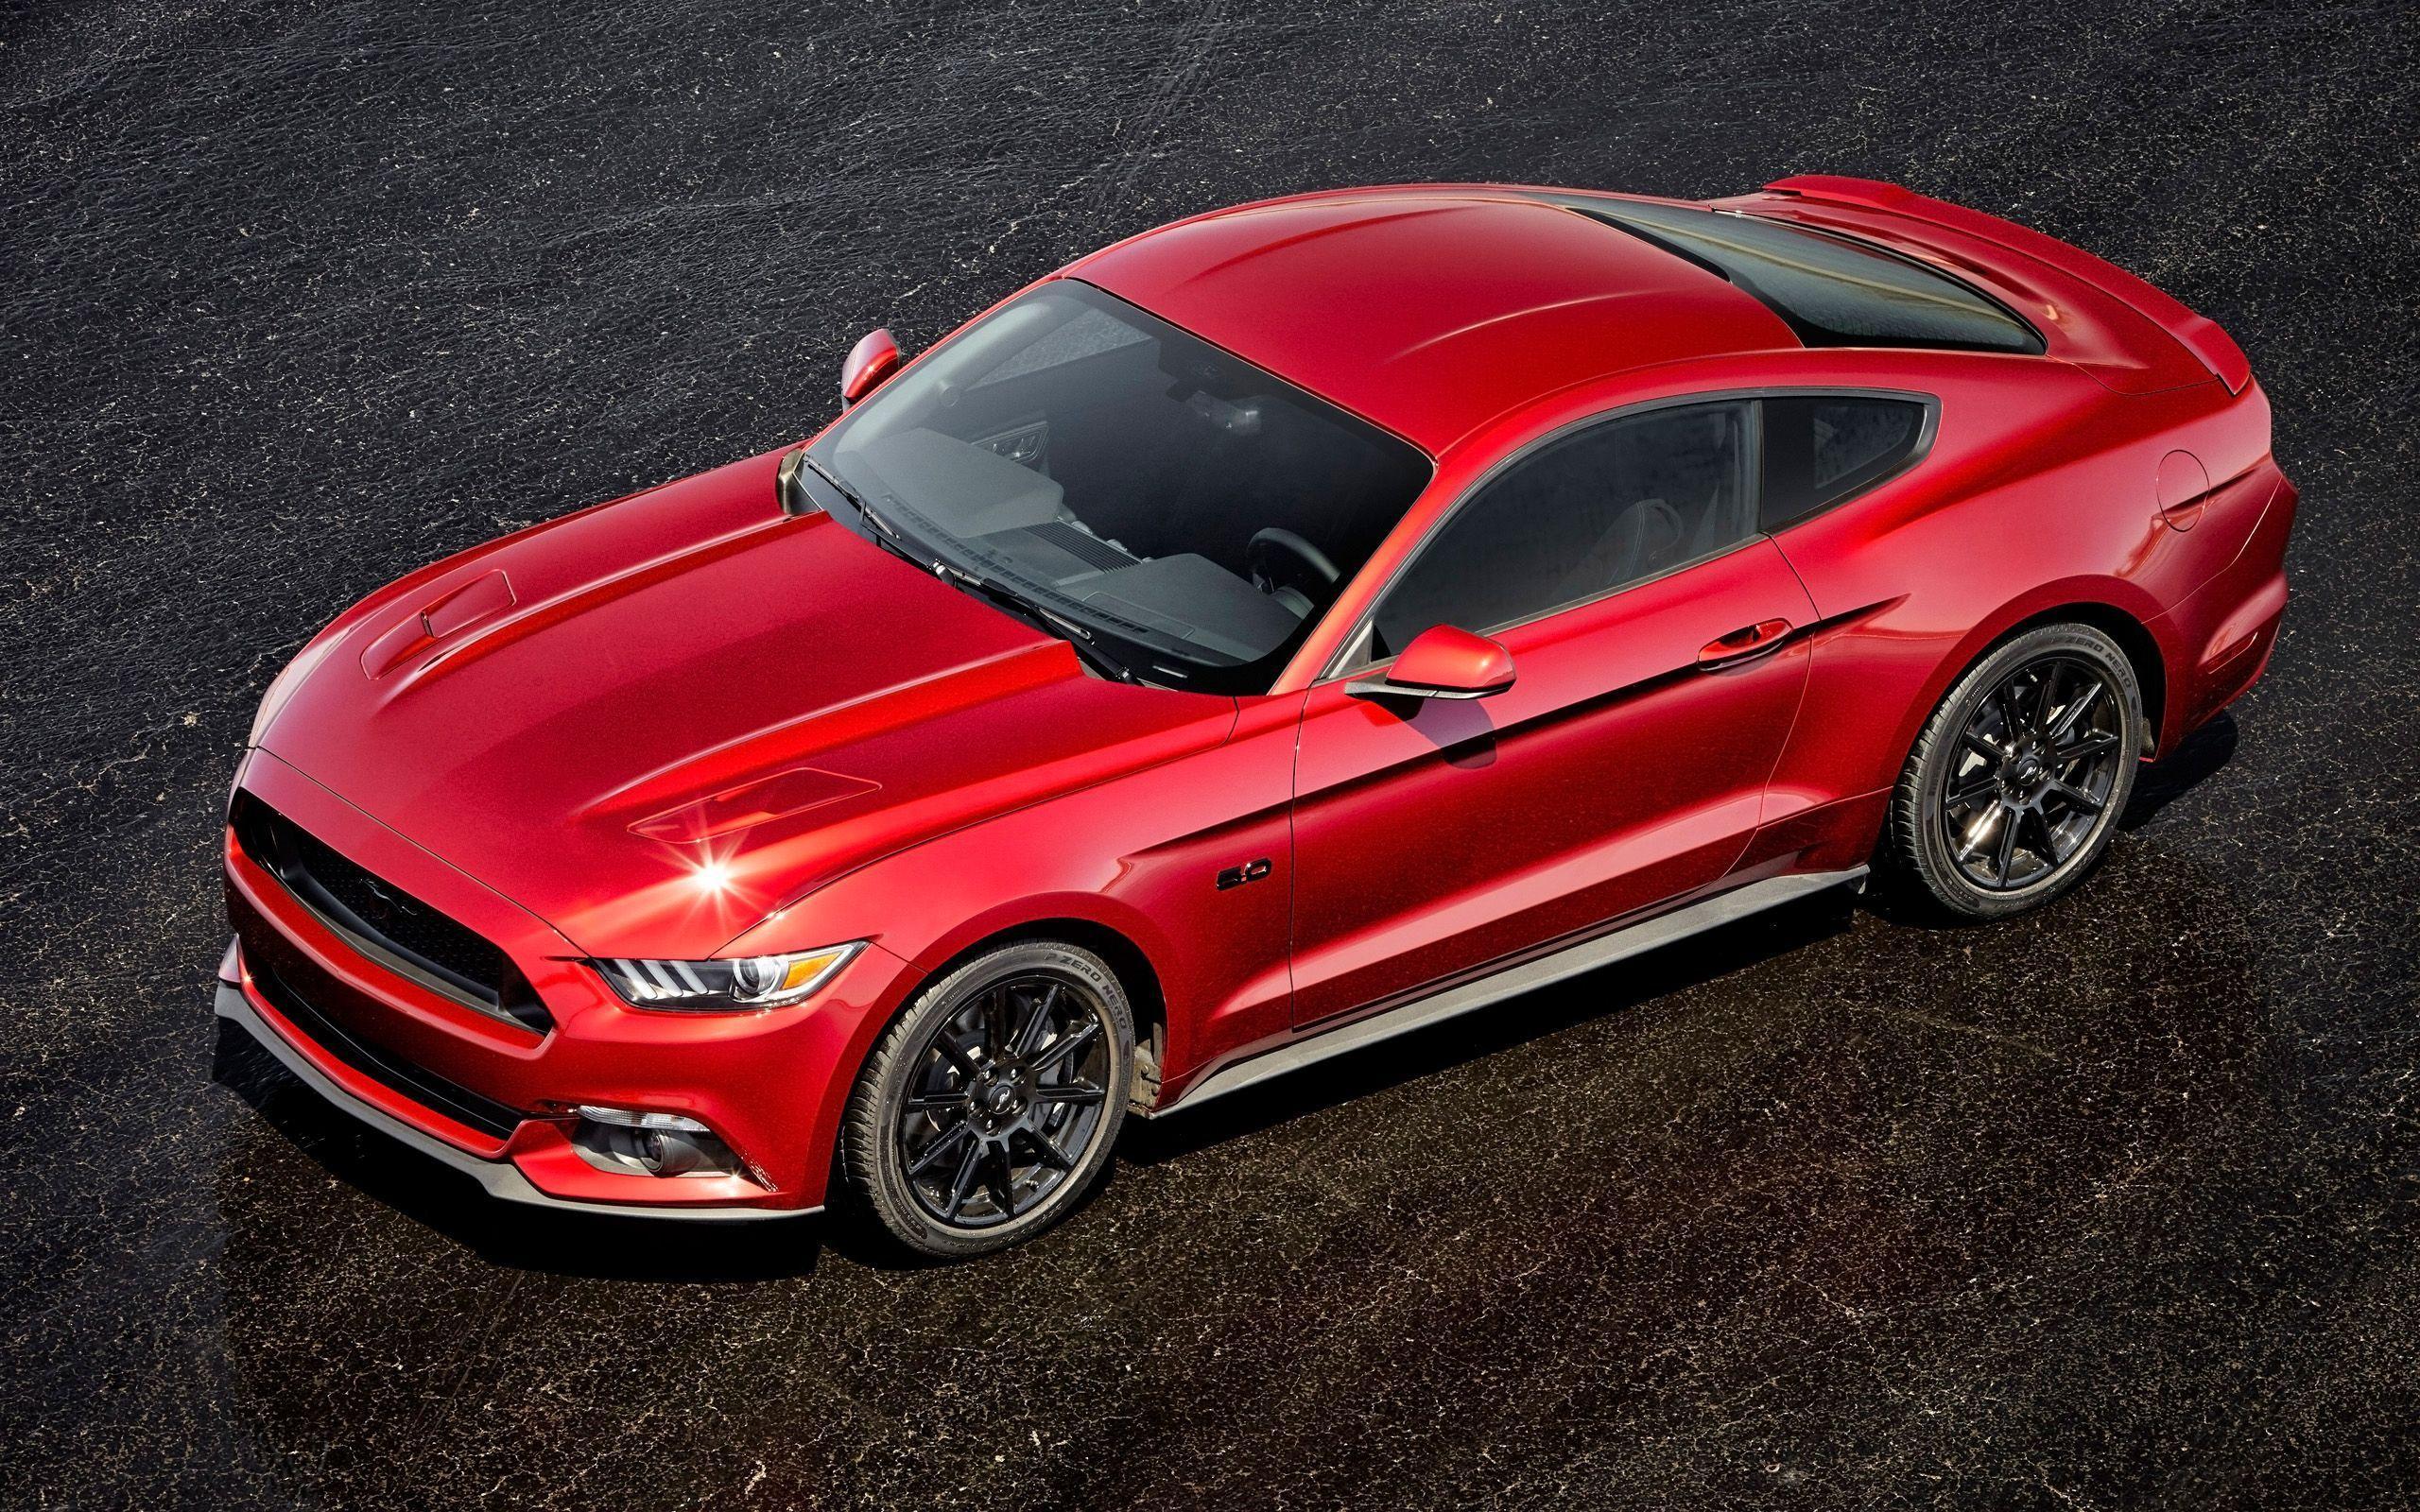 2016 Ford Mustang GT Wallpapers